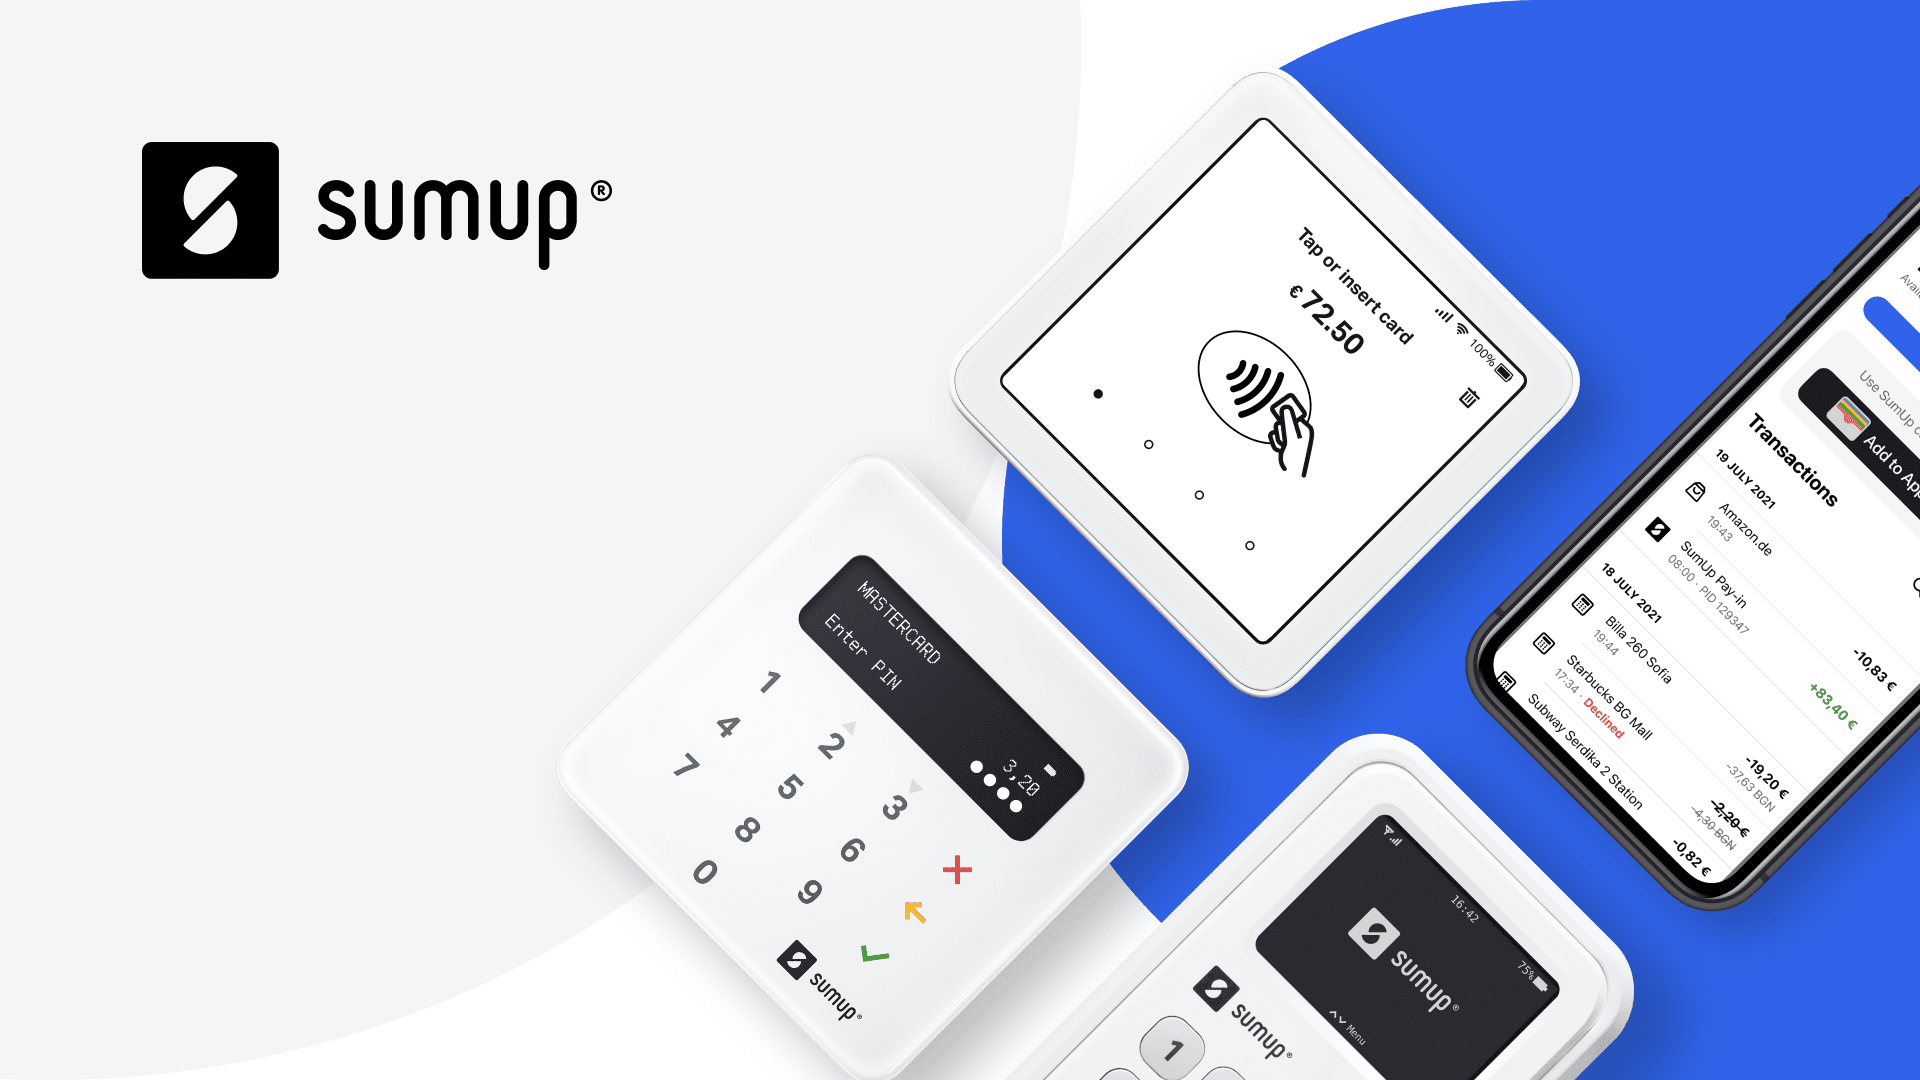 SumUp: Explore our card readers and payment solutions